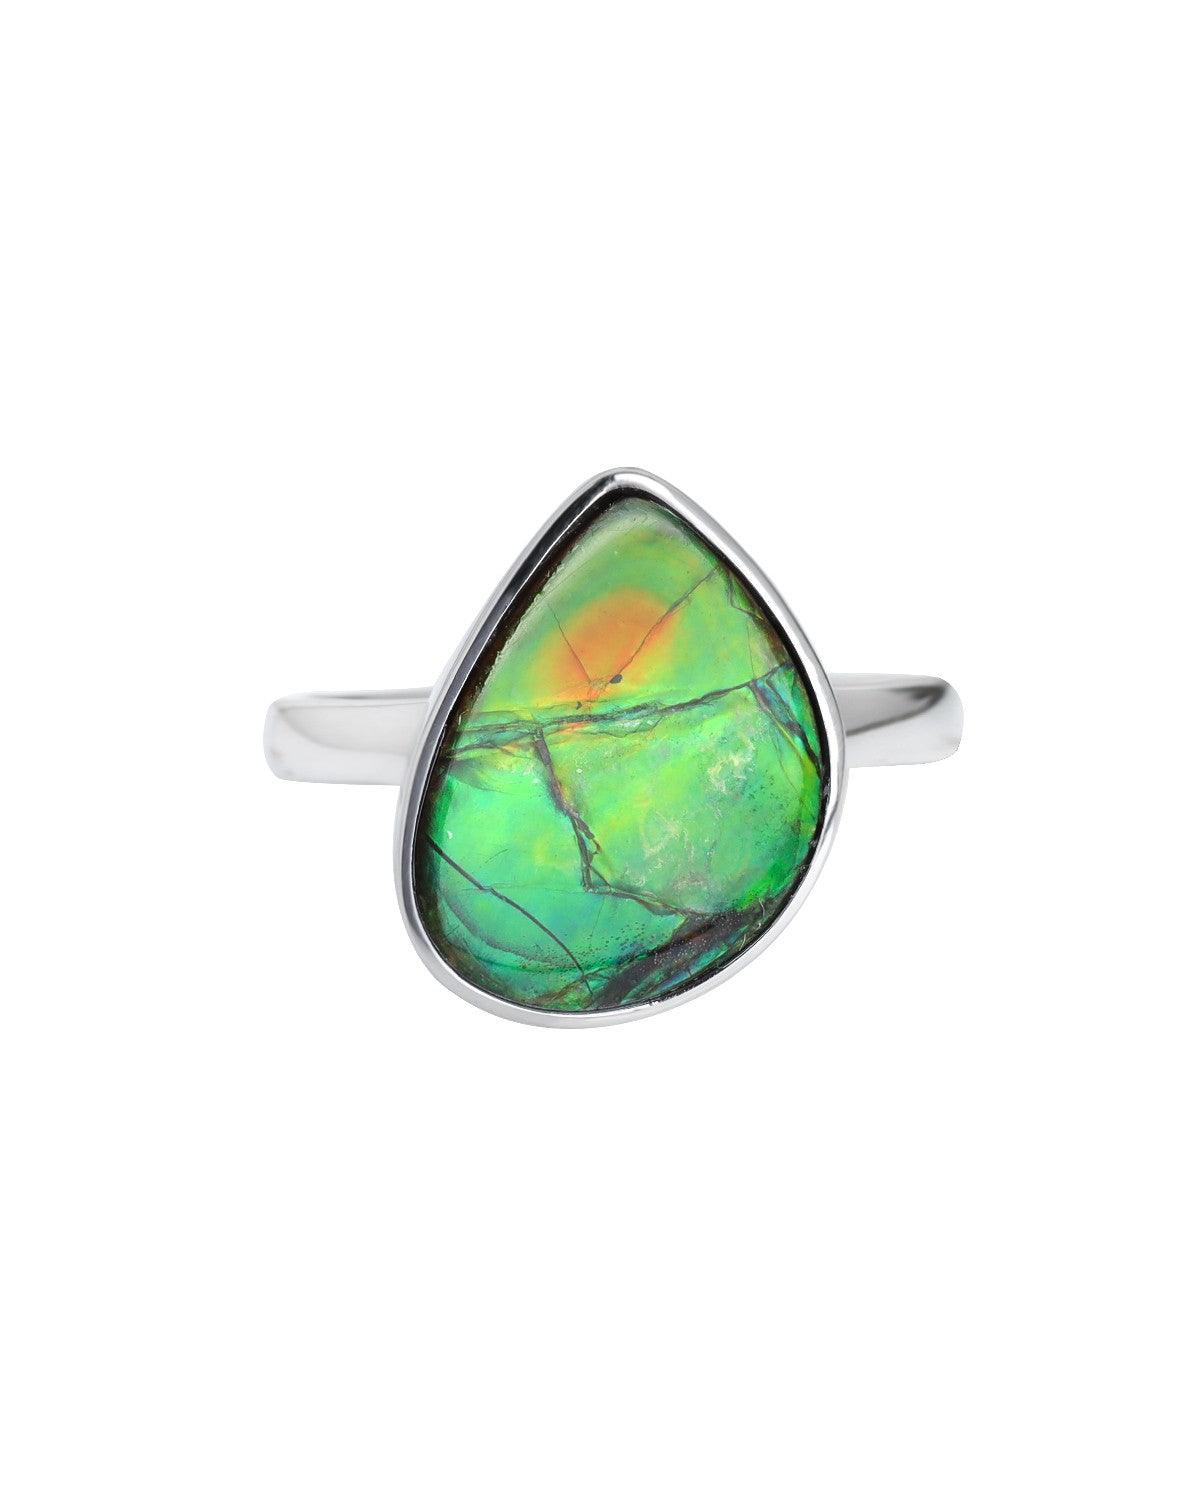 7.85 Ct. Ammolite Ring Solid 925 Sterling Silver Jewelry - YoTreasure